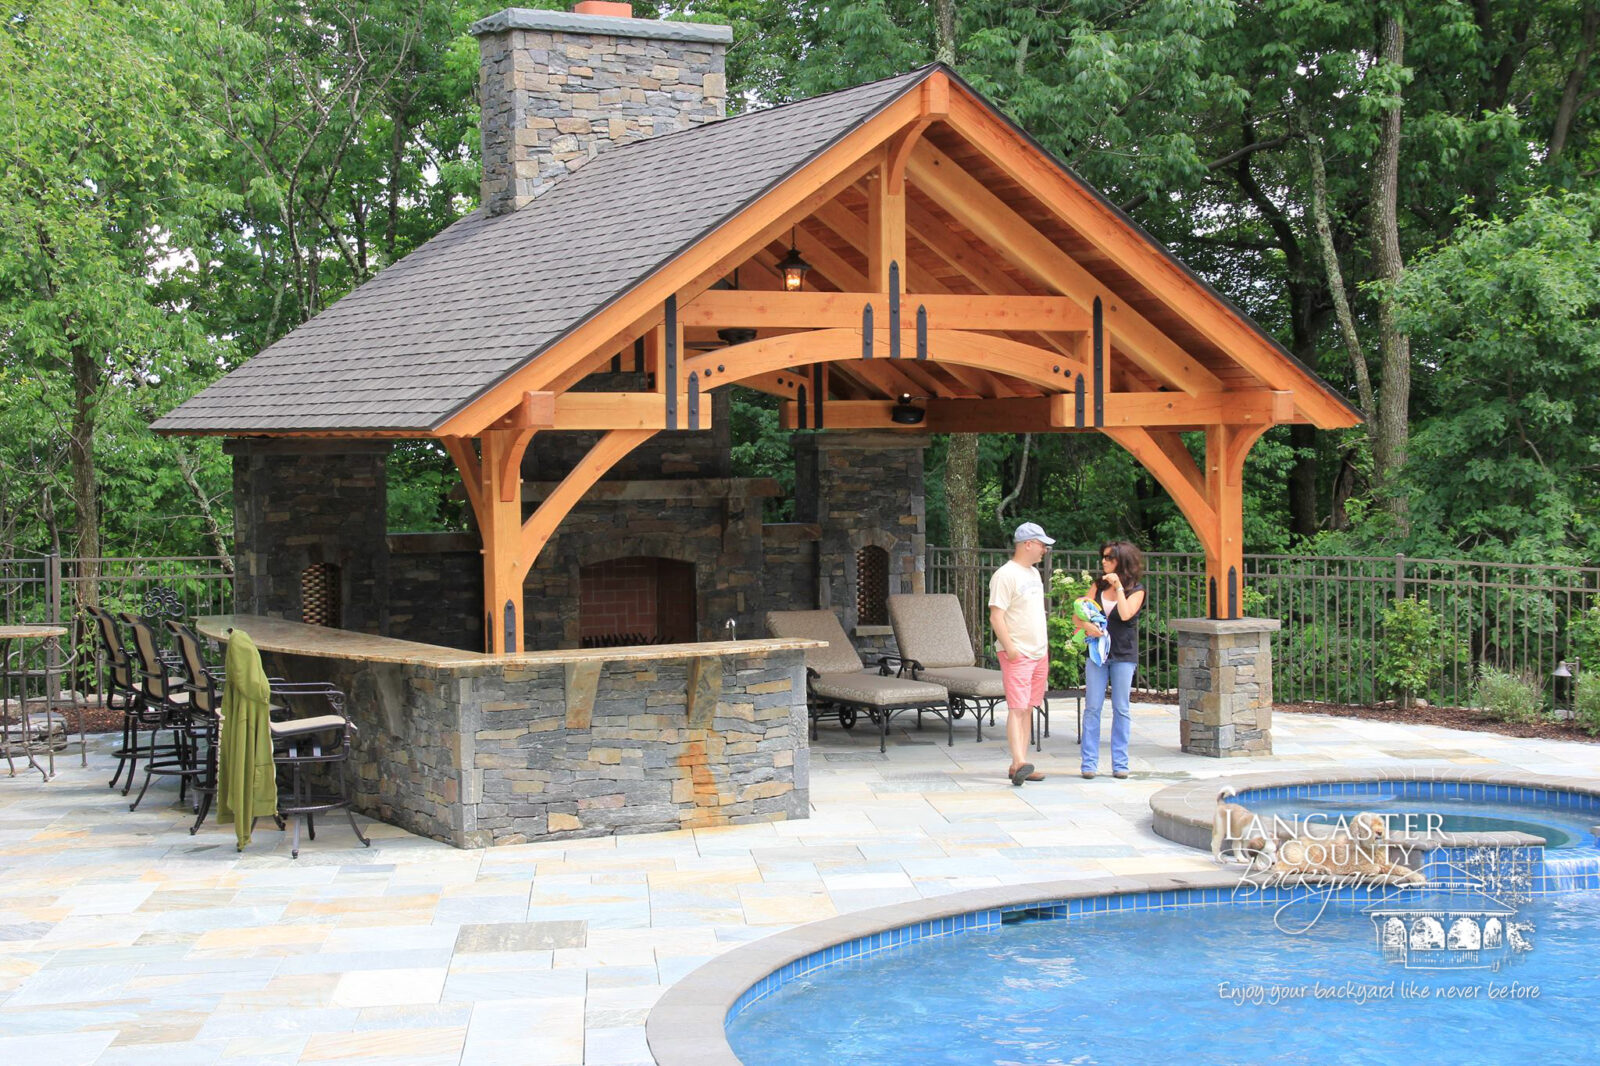 Cost of an Outdoor Pavilion | Amish Quality Built Pavilions